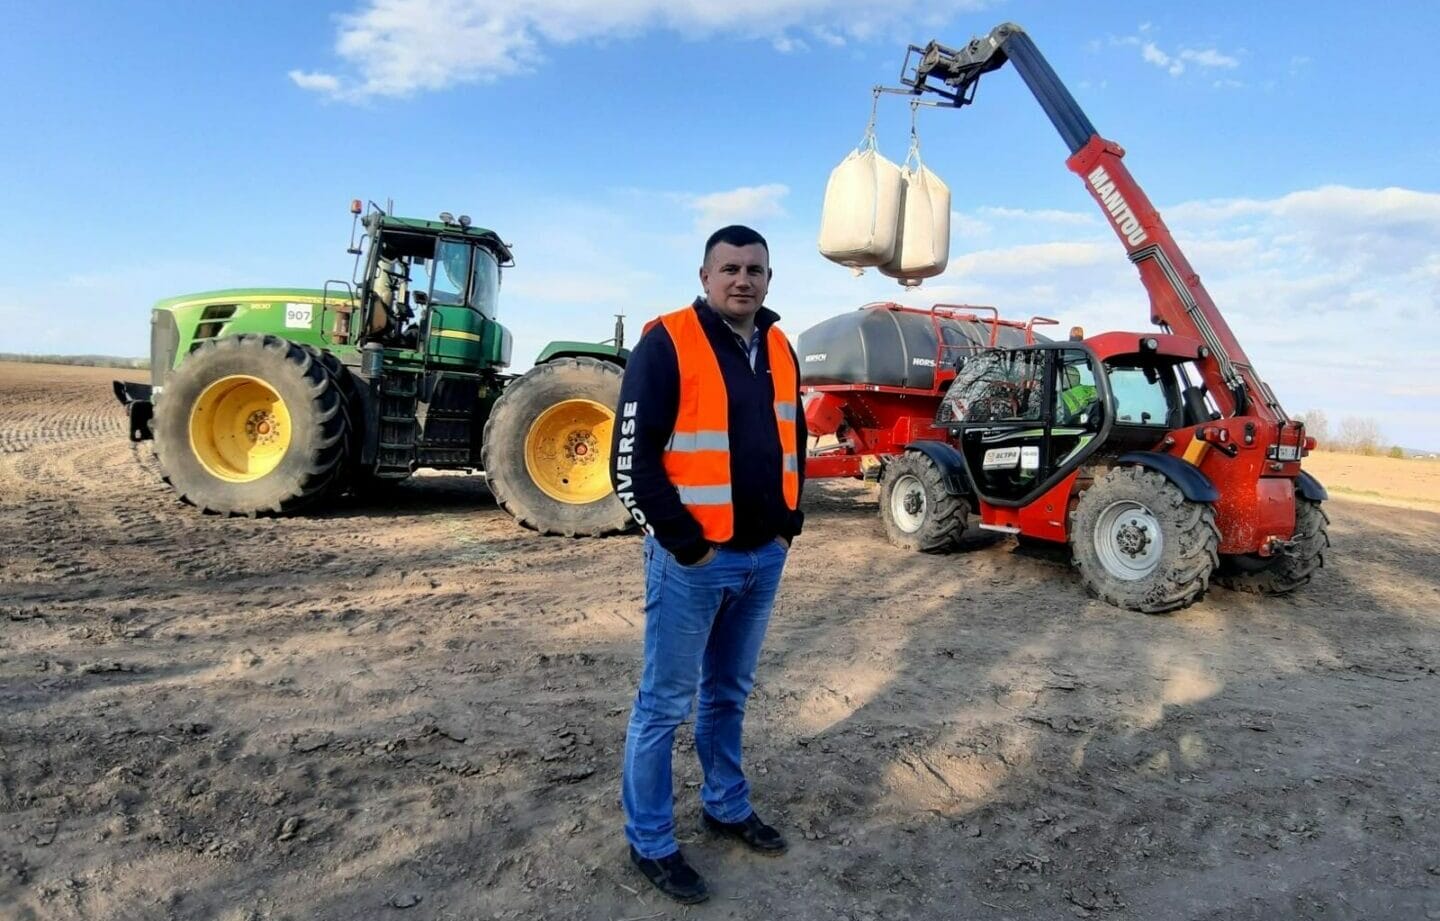 Roman Pavliuk, CEO of Mriya Farming Bukovyna which is engaged in the cultivation of grain and industrial crops